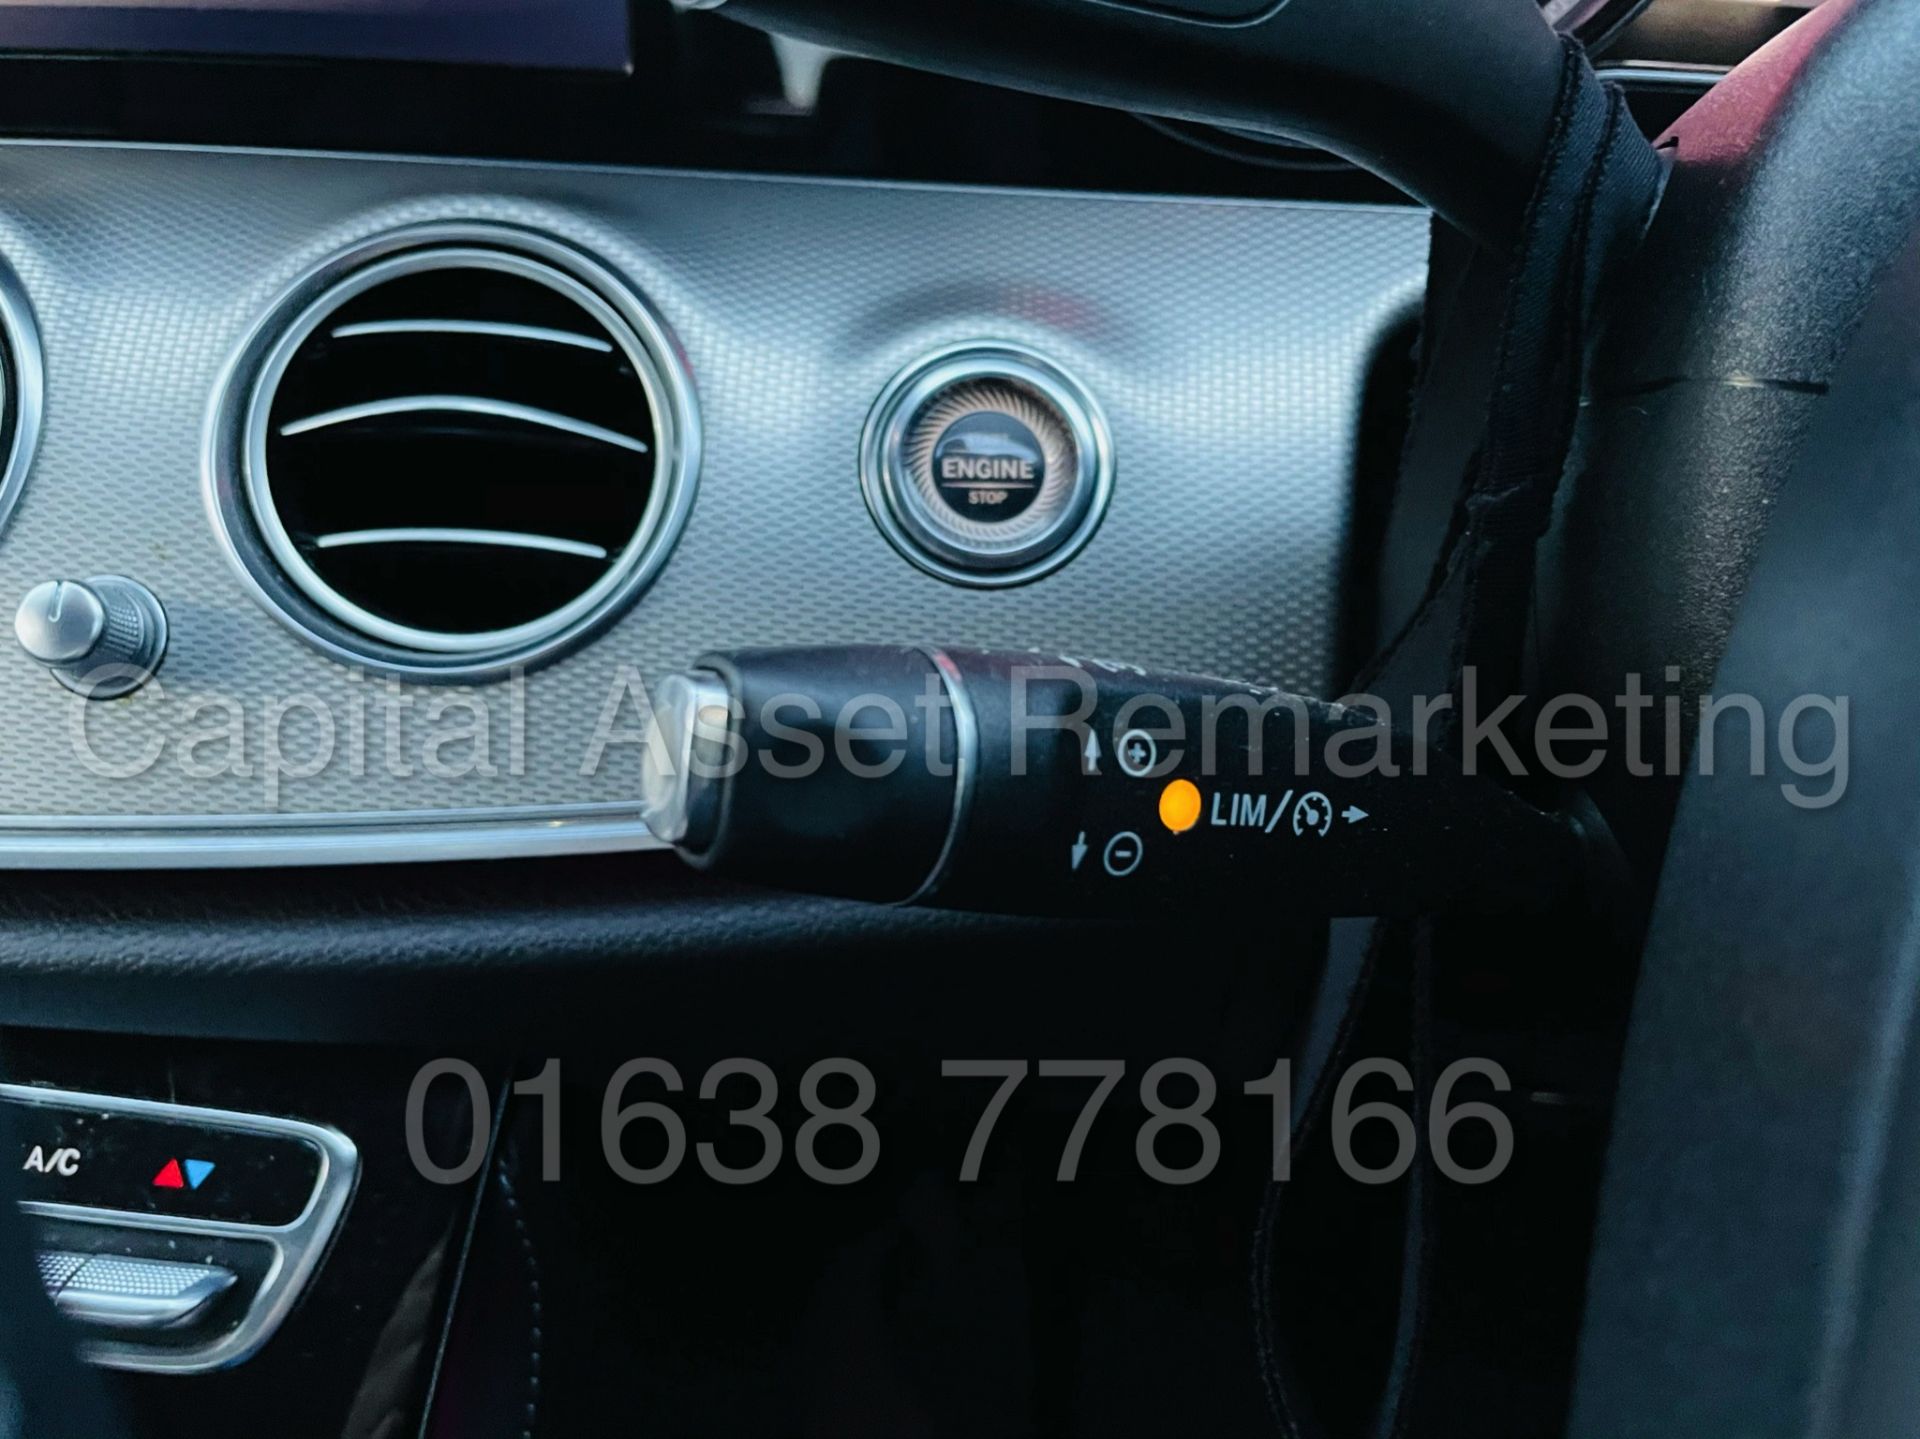 (ON SALE) MERCEDES-BENZ E220D *SALOON* (2018 - NEW MODEL) '9-G TRONIC AUTO - LEATHER - SAT NAV' - Image 46 of 50